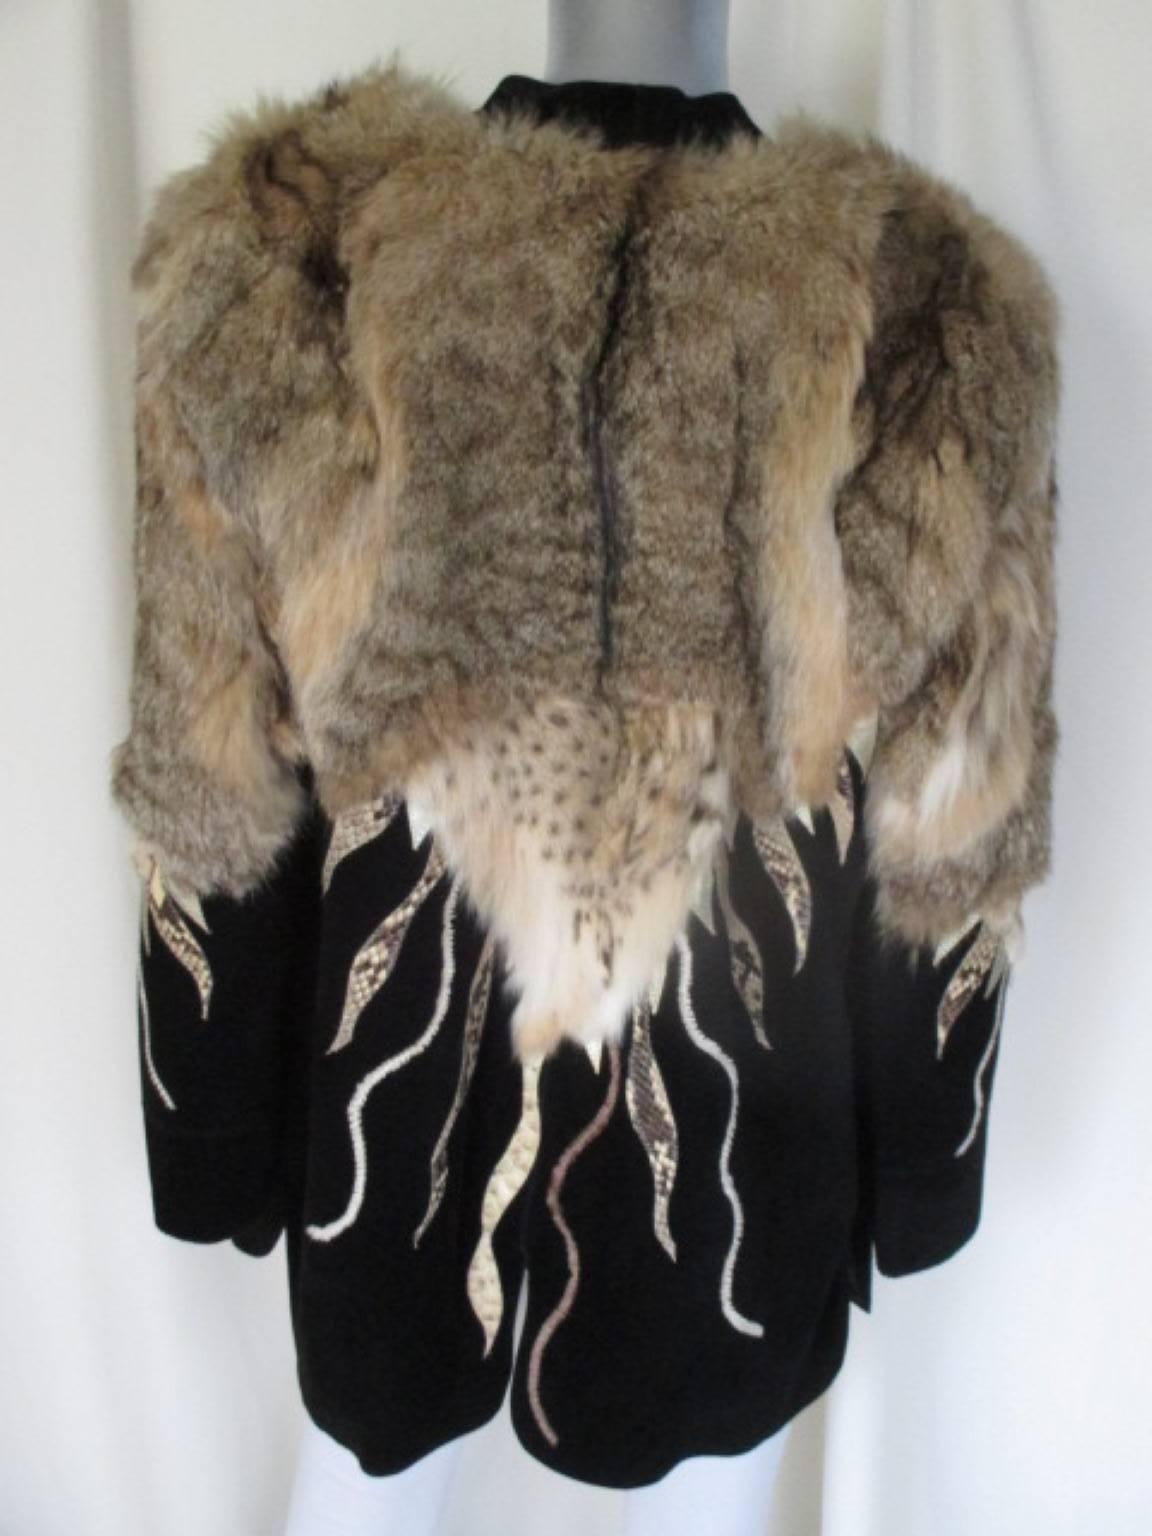 This is an unique vintage piece with beaded embroideries in the front and back side made from soft suede leather with snake and fur details.
This coat has 2 pockets and closes with 3 ties.
Size fits like EU 40
Please note that vintage items are not